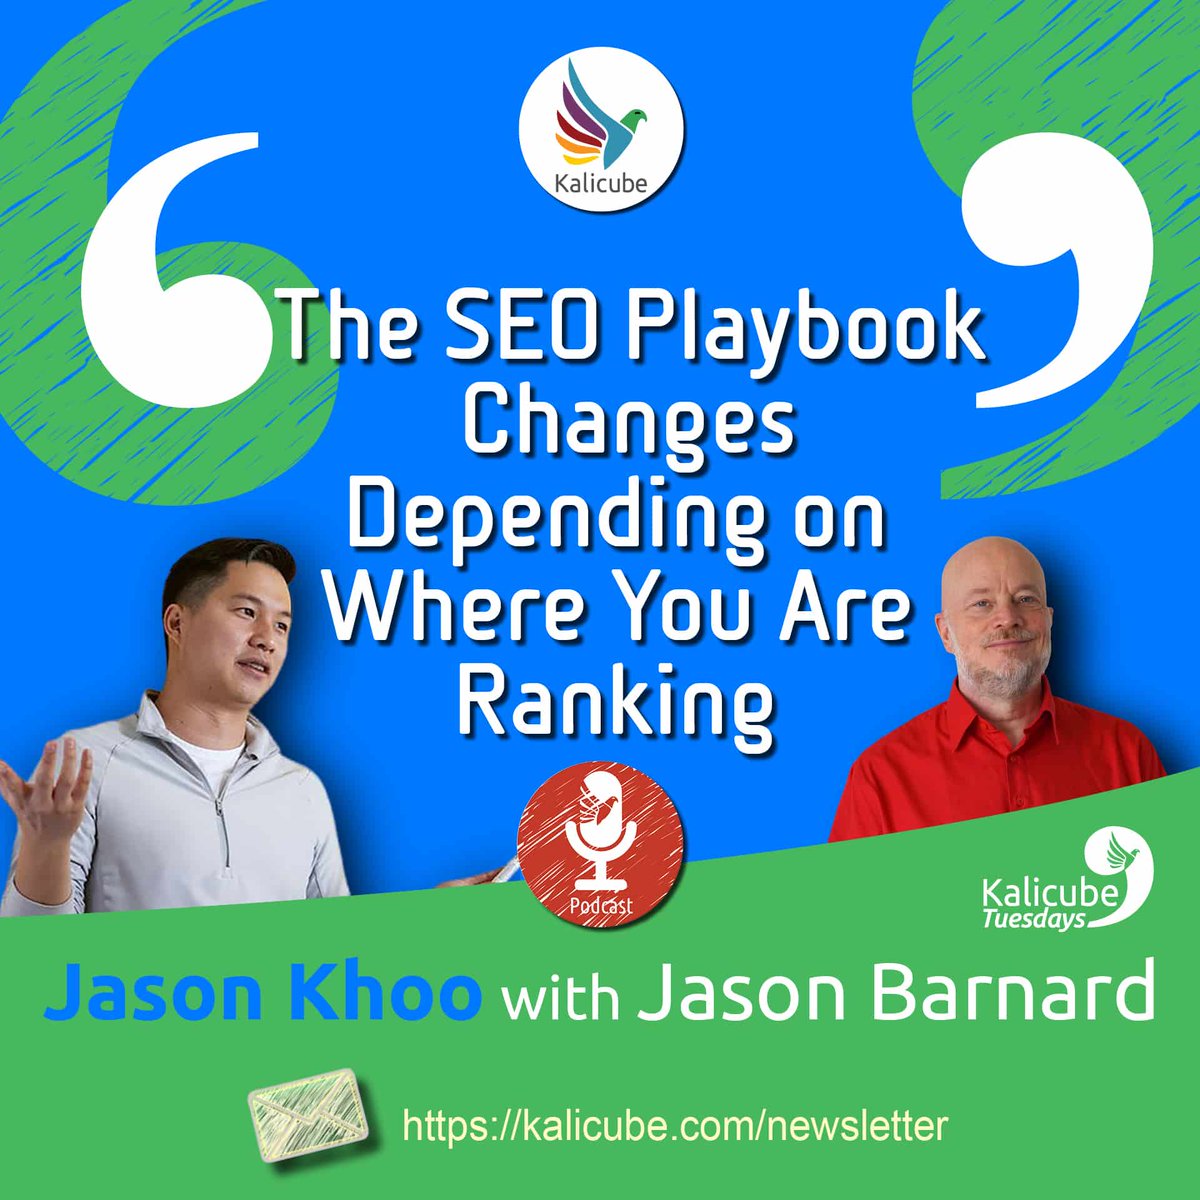 Tune in as we explore the importance of conversion rate optimization (CRO), user experience & balancing content with technical #SEO aspects with the amazing @JasonJKhoo.

Register now!
eventbrite.com/e/kalicube-tue…

#Ranking #SEOVariables #KalicubeTuesdays